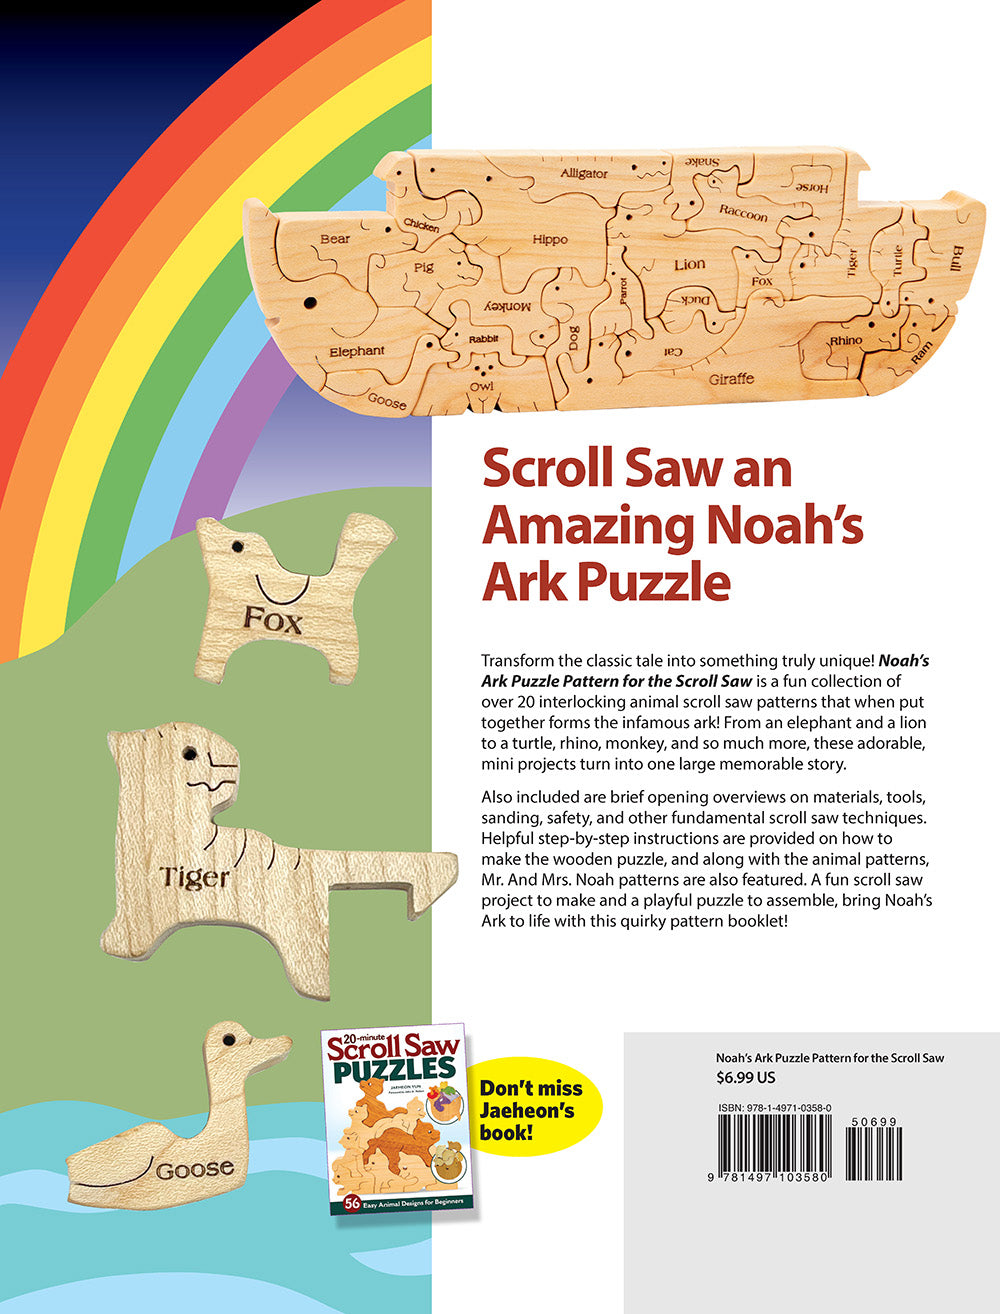 Noah's Ark Puzzle Pattern for the Scroll Saw